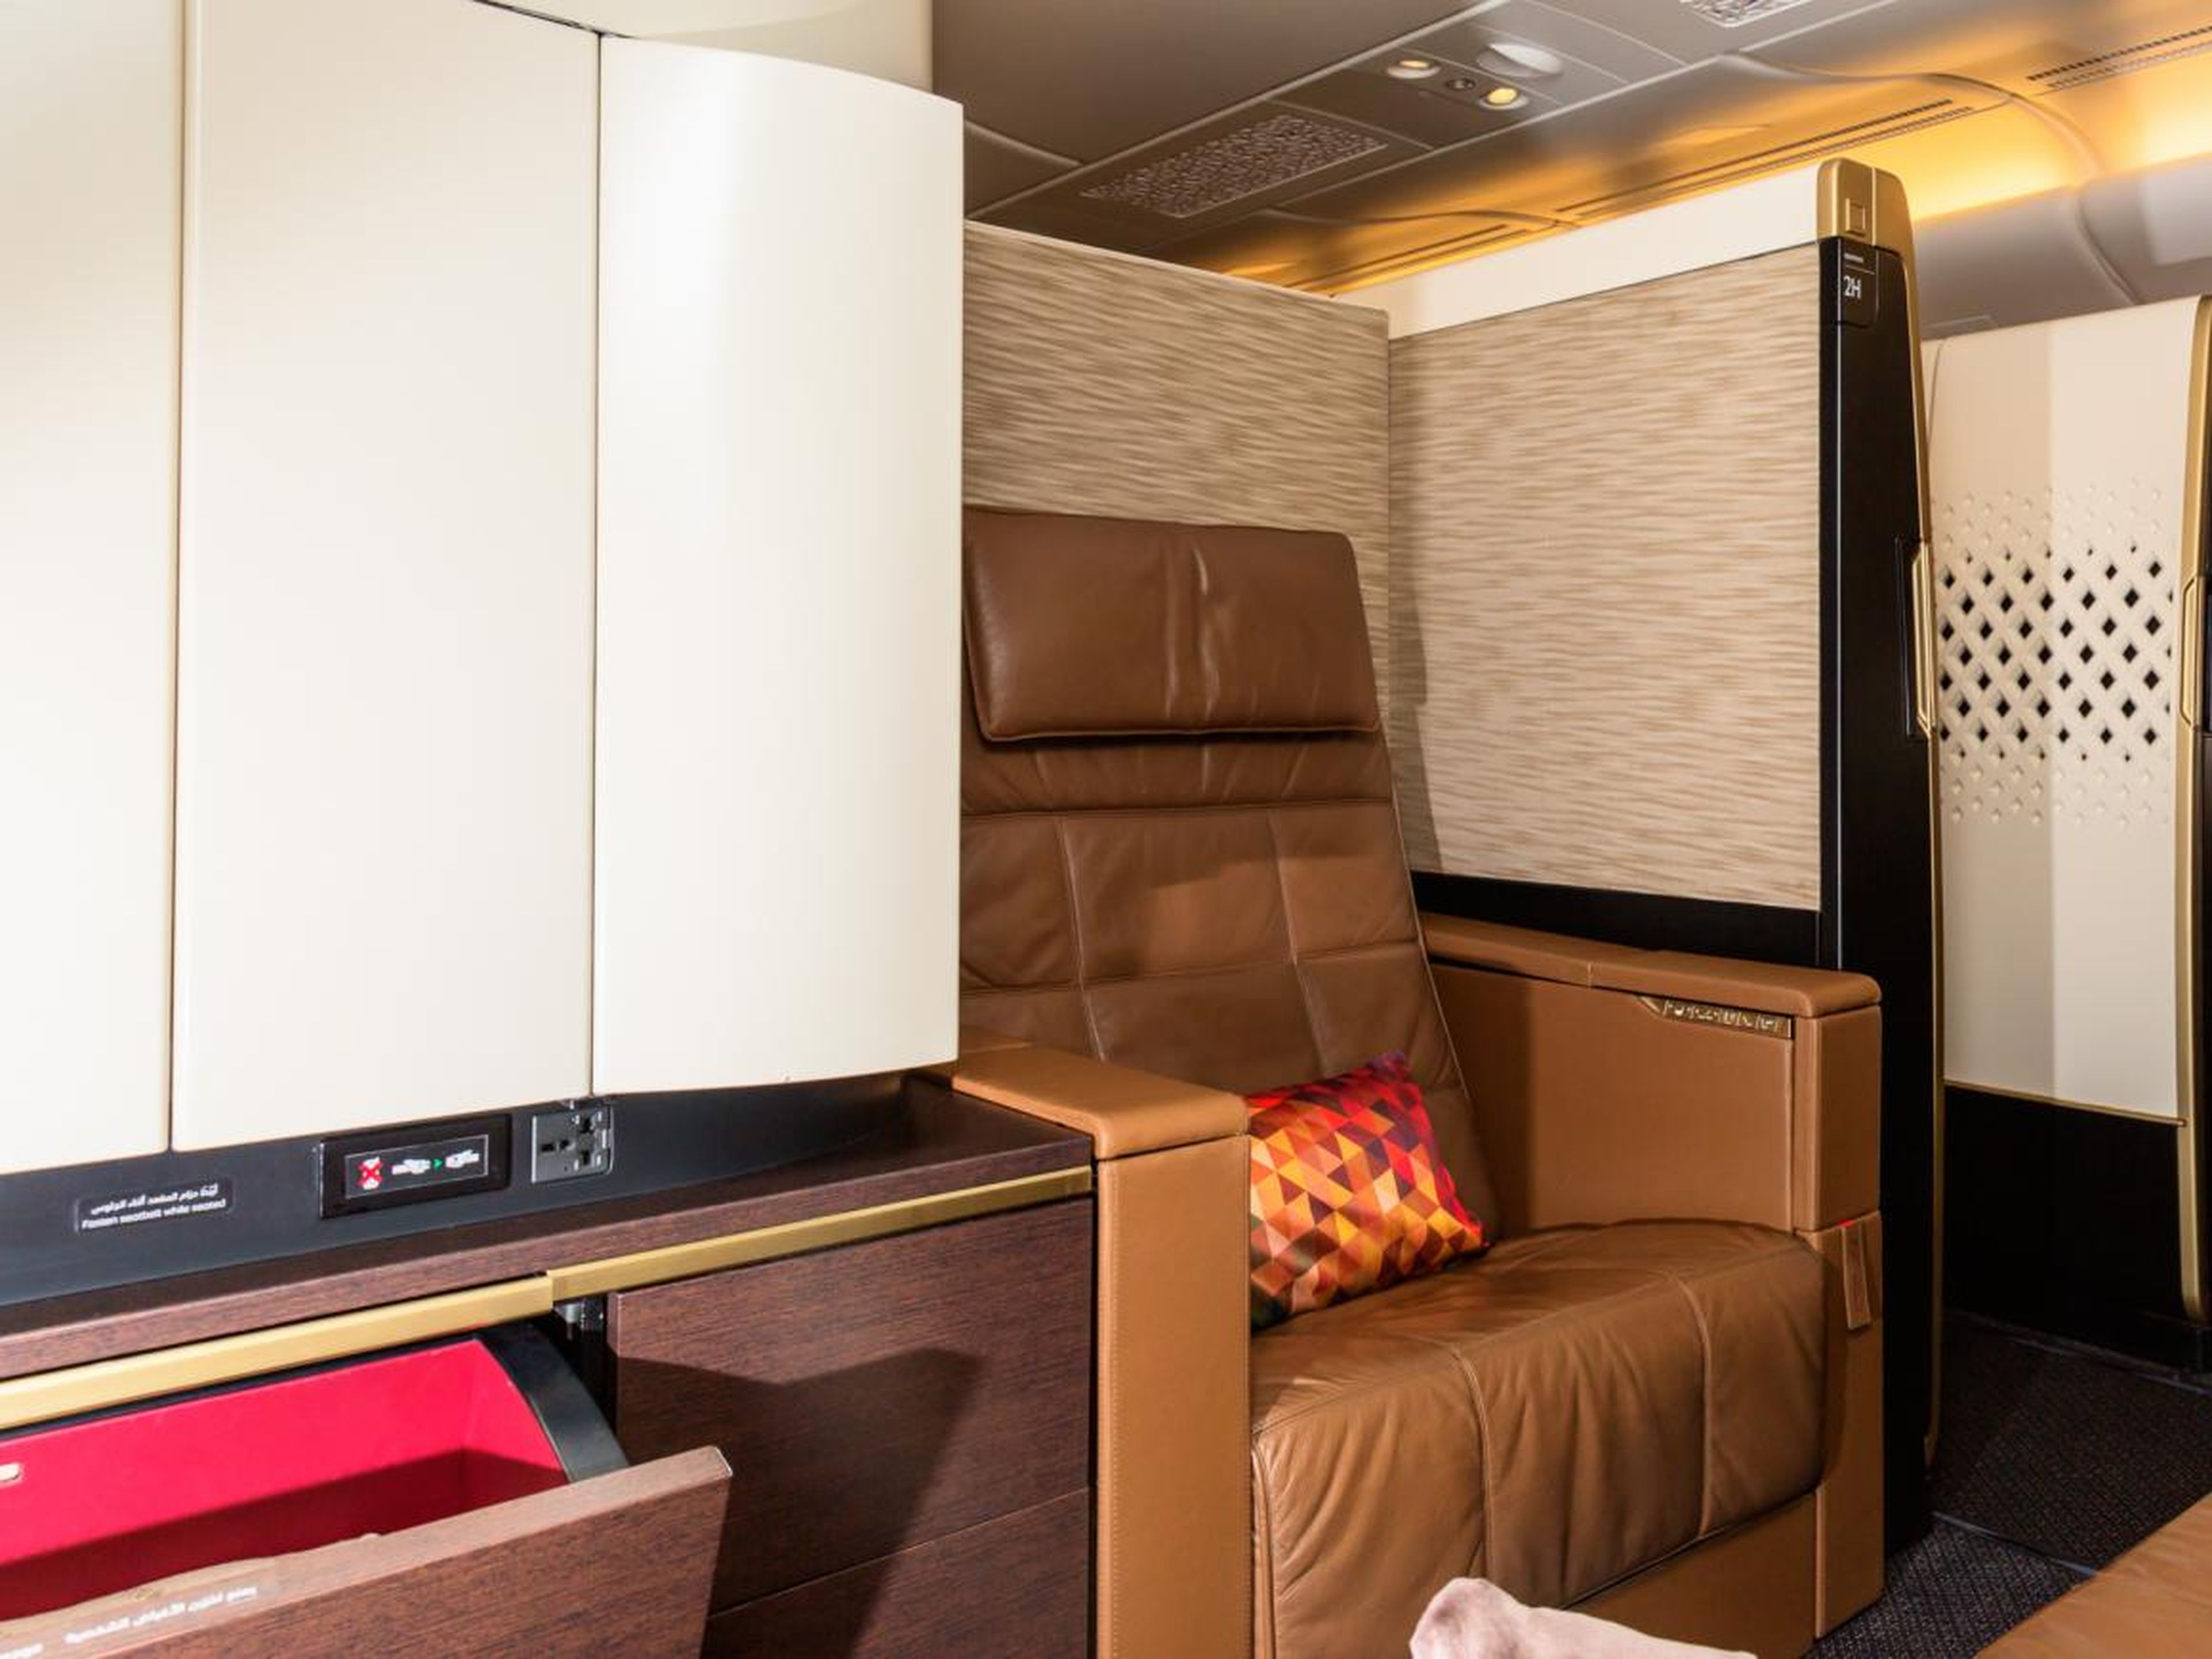 As an airliner, the A380 promised luxury and comfort on an unprecedented scale.